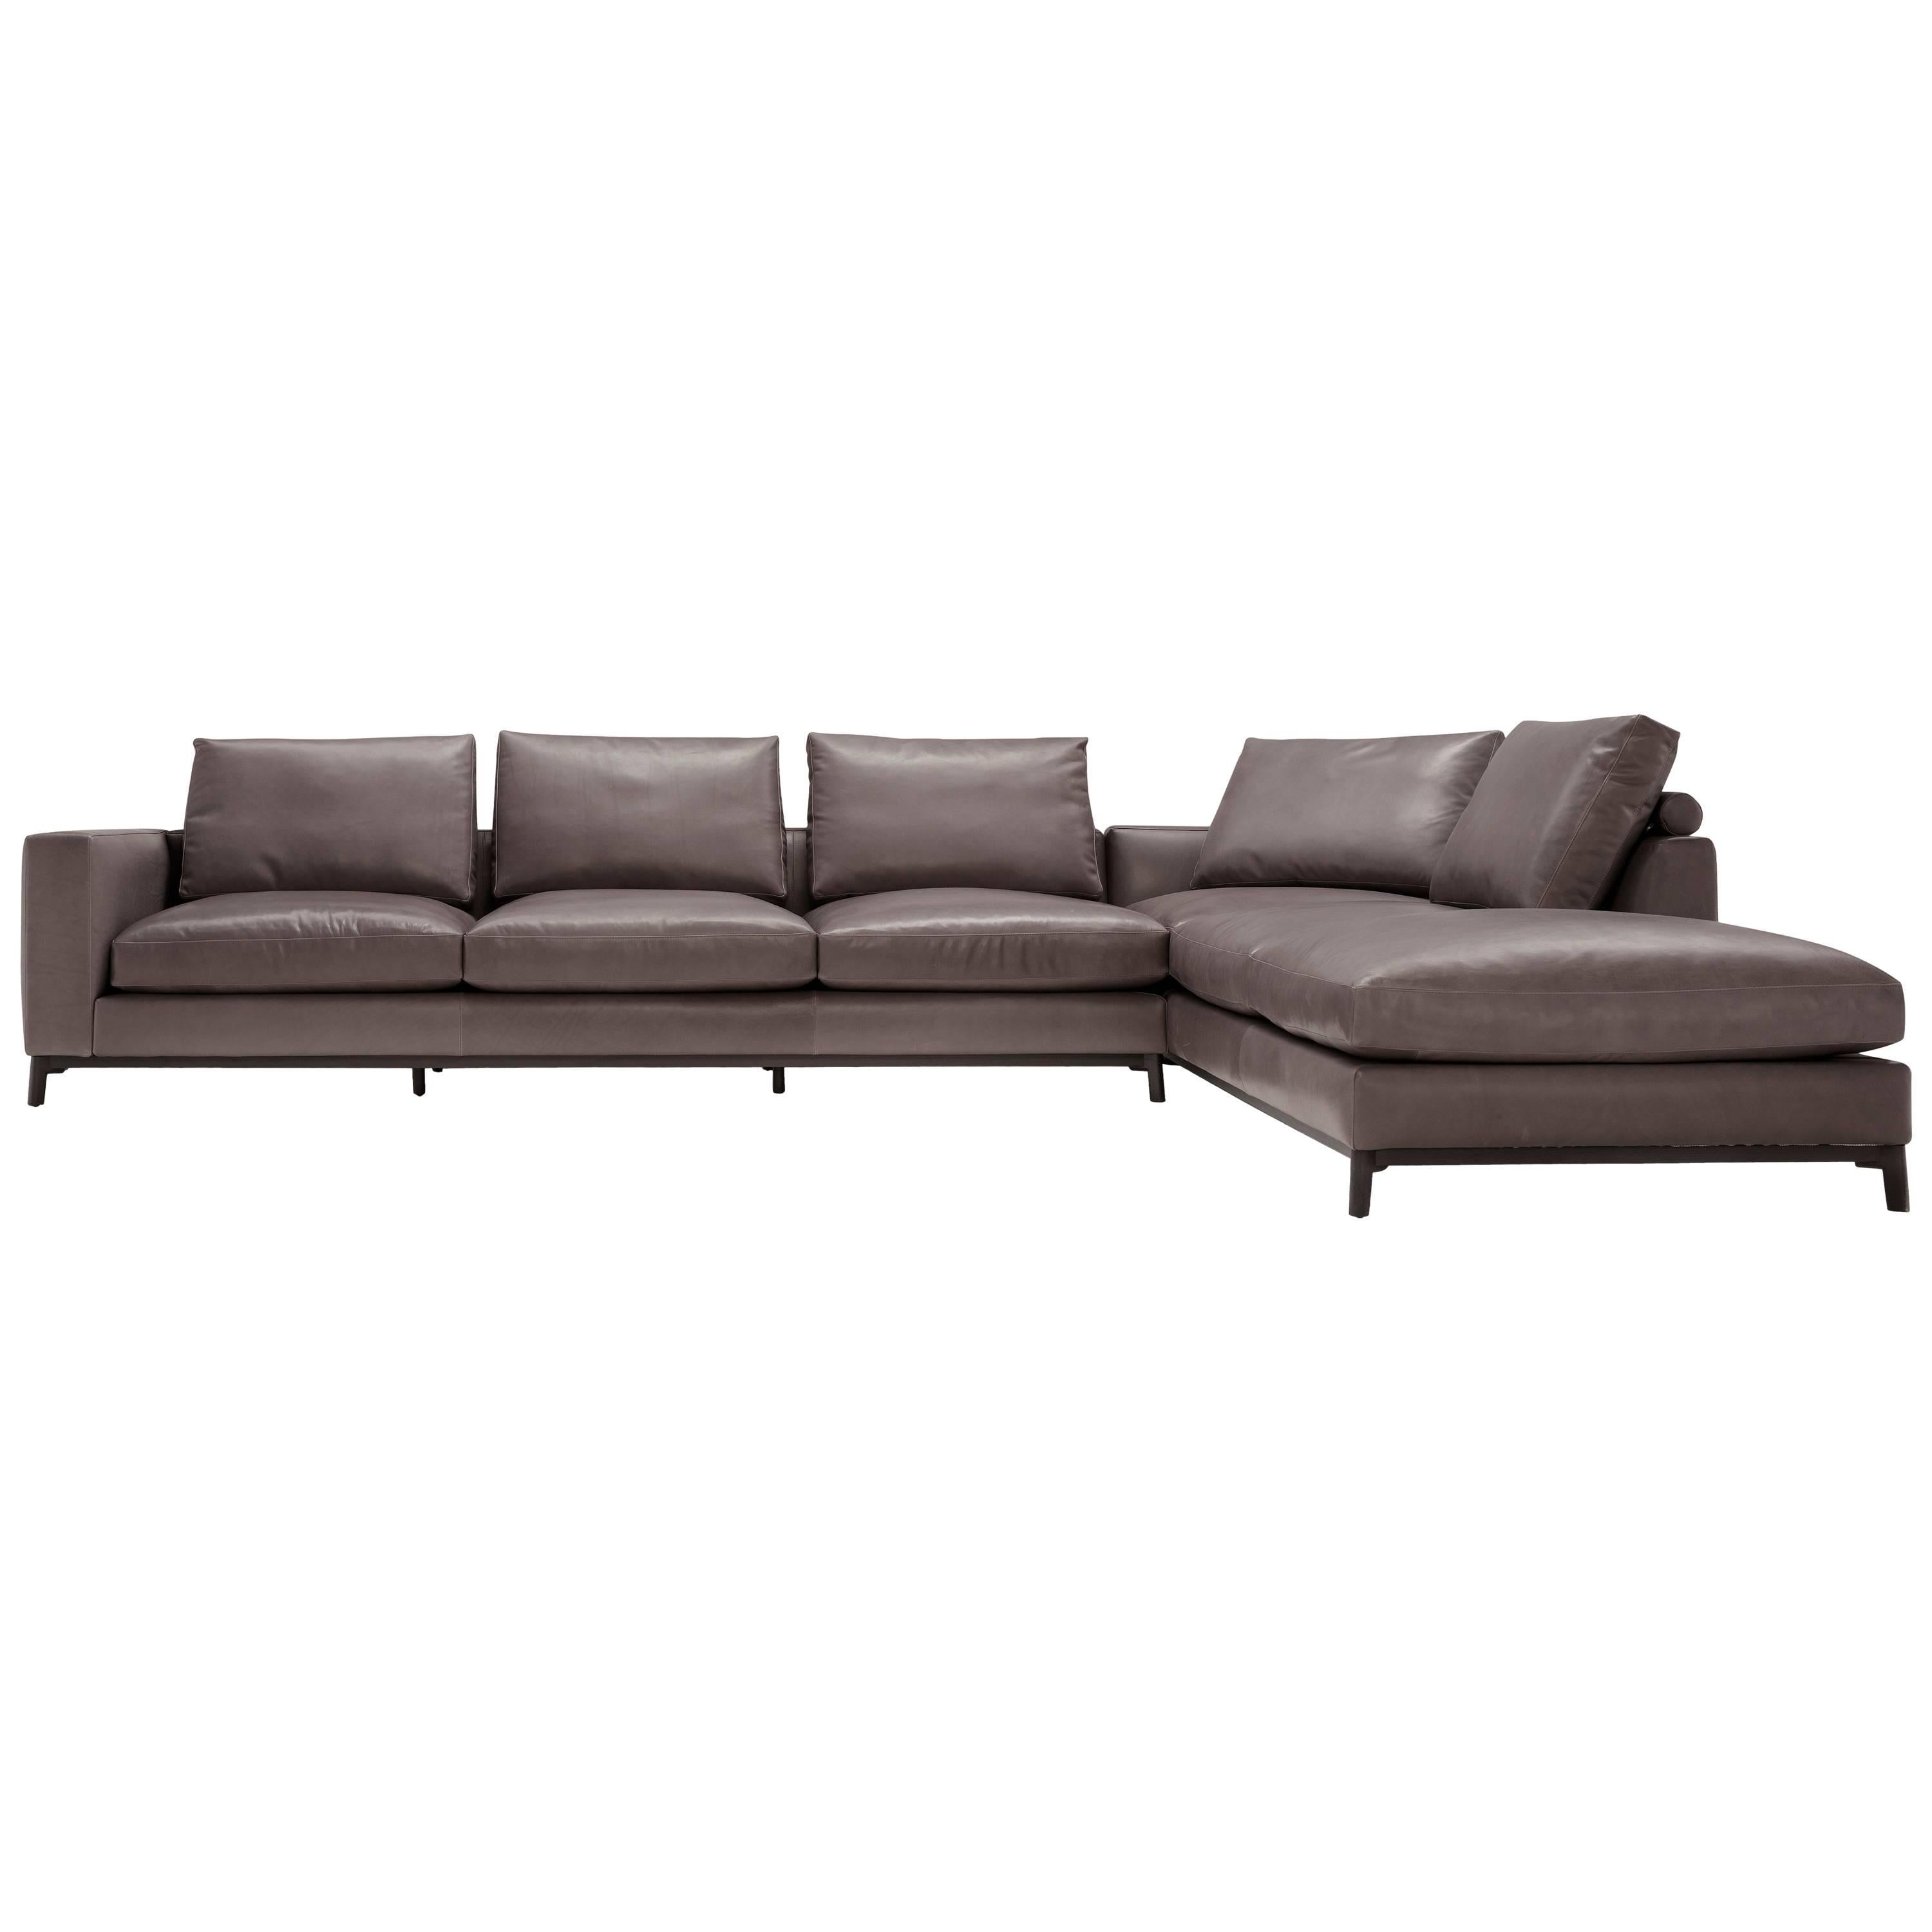 Dorsey Composition Sofa in Dark Brown by Amura Lab For Sale